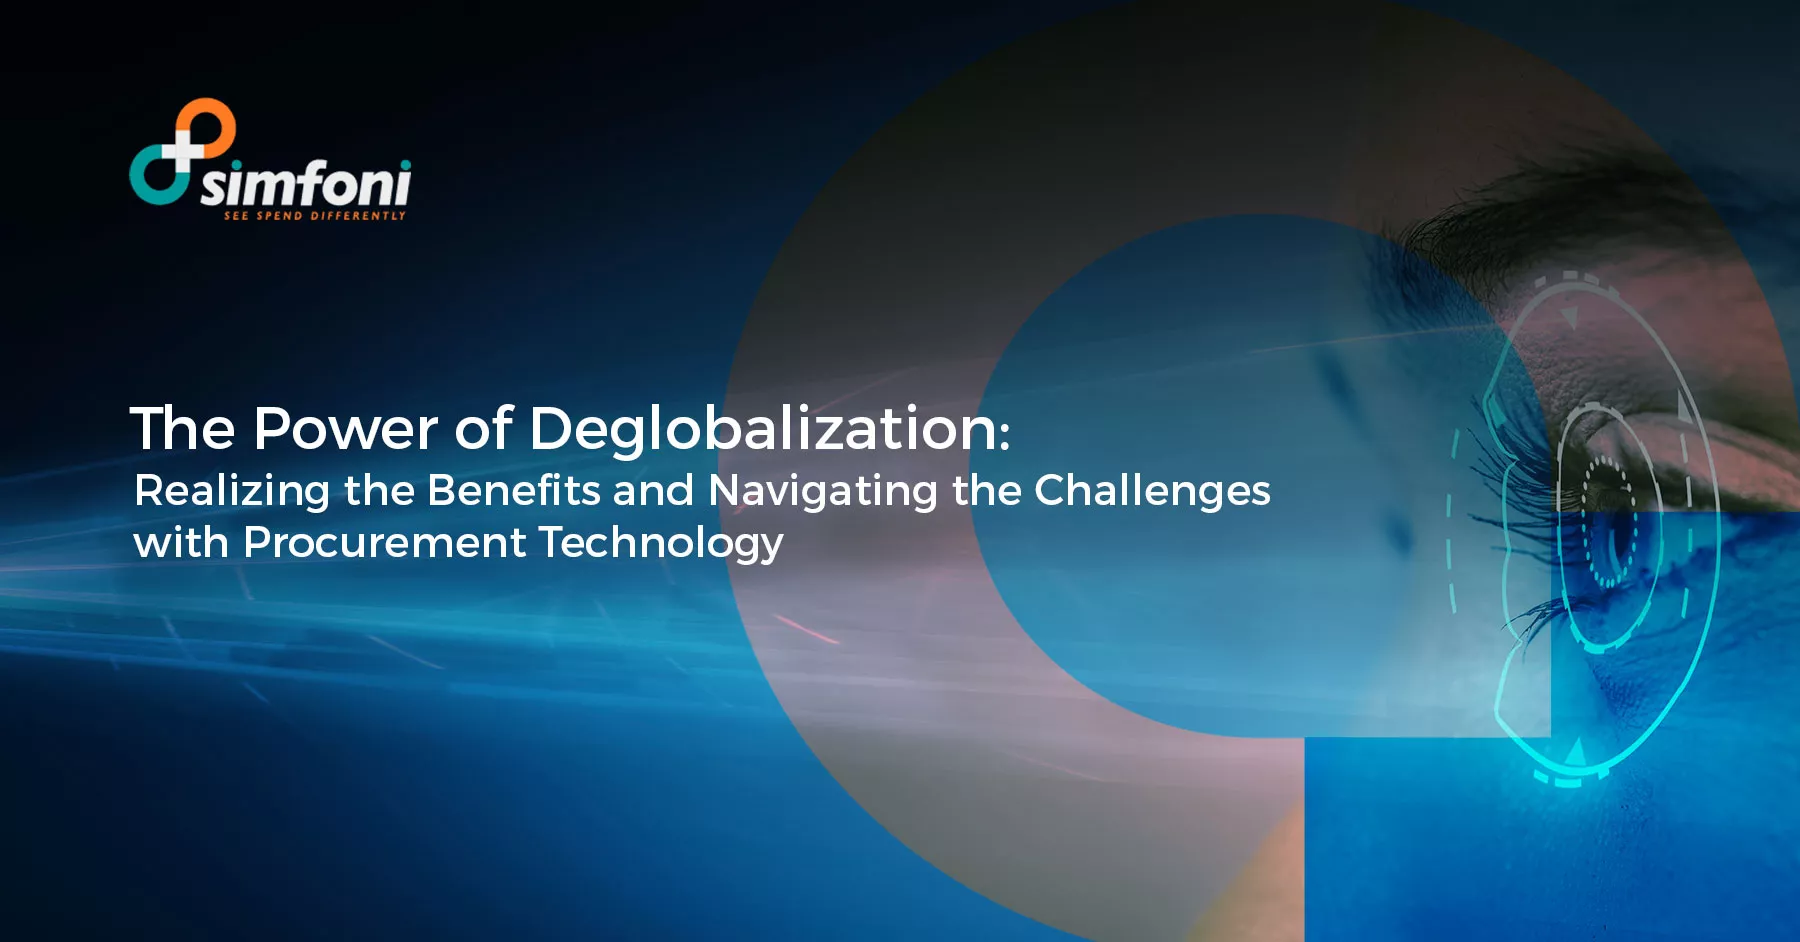 The Power of Deglobalization: Realizing the Benefits and Navigating the Challenges with Procurement Technology